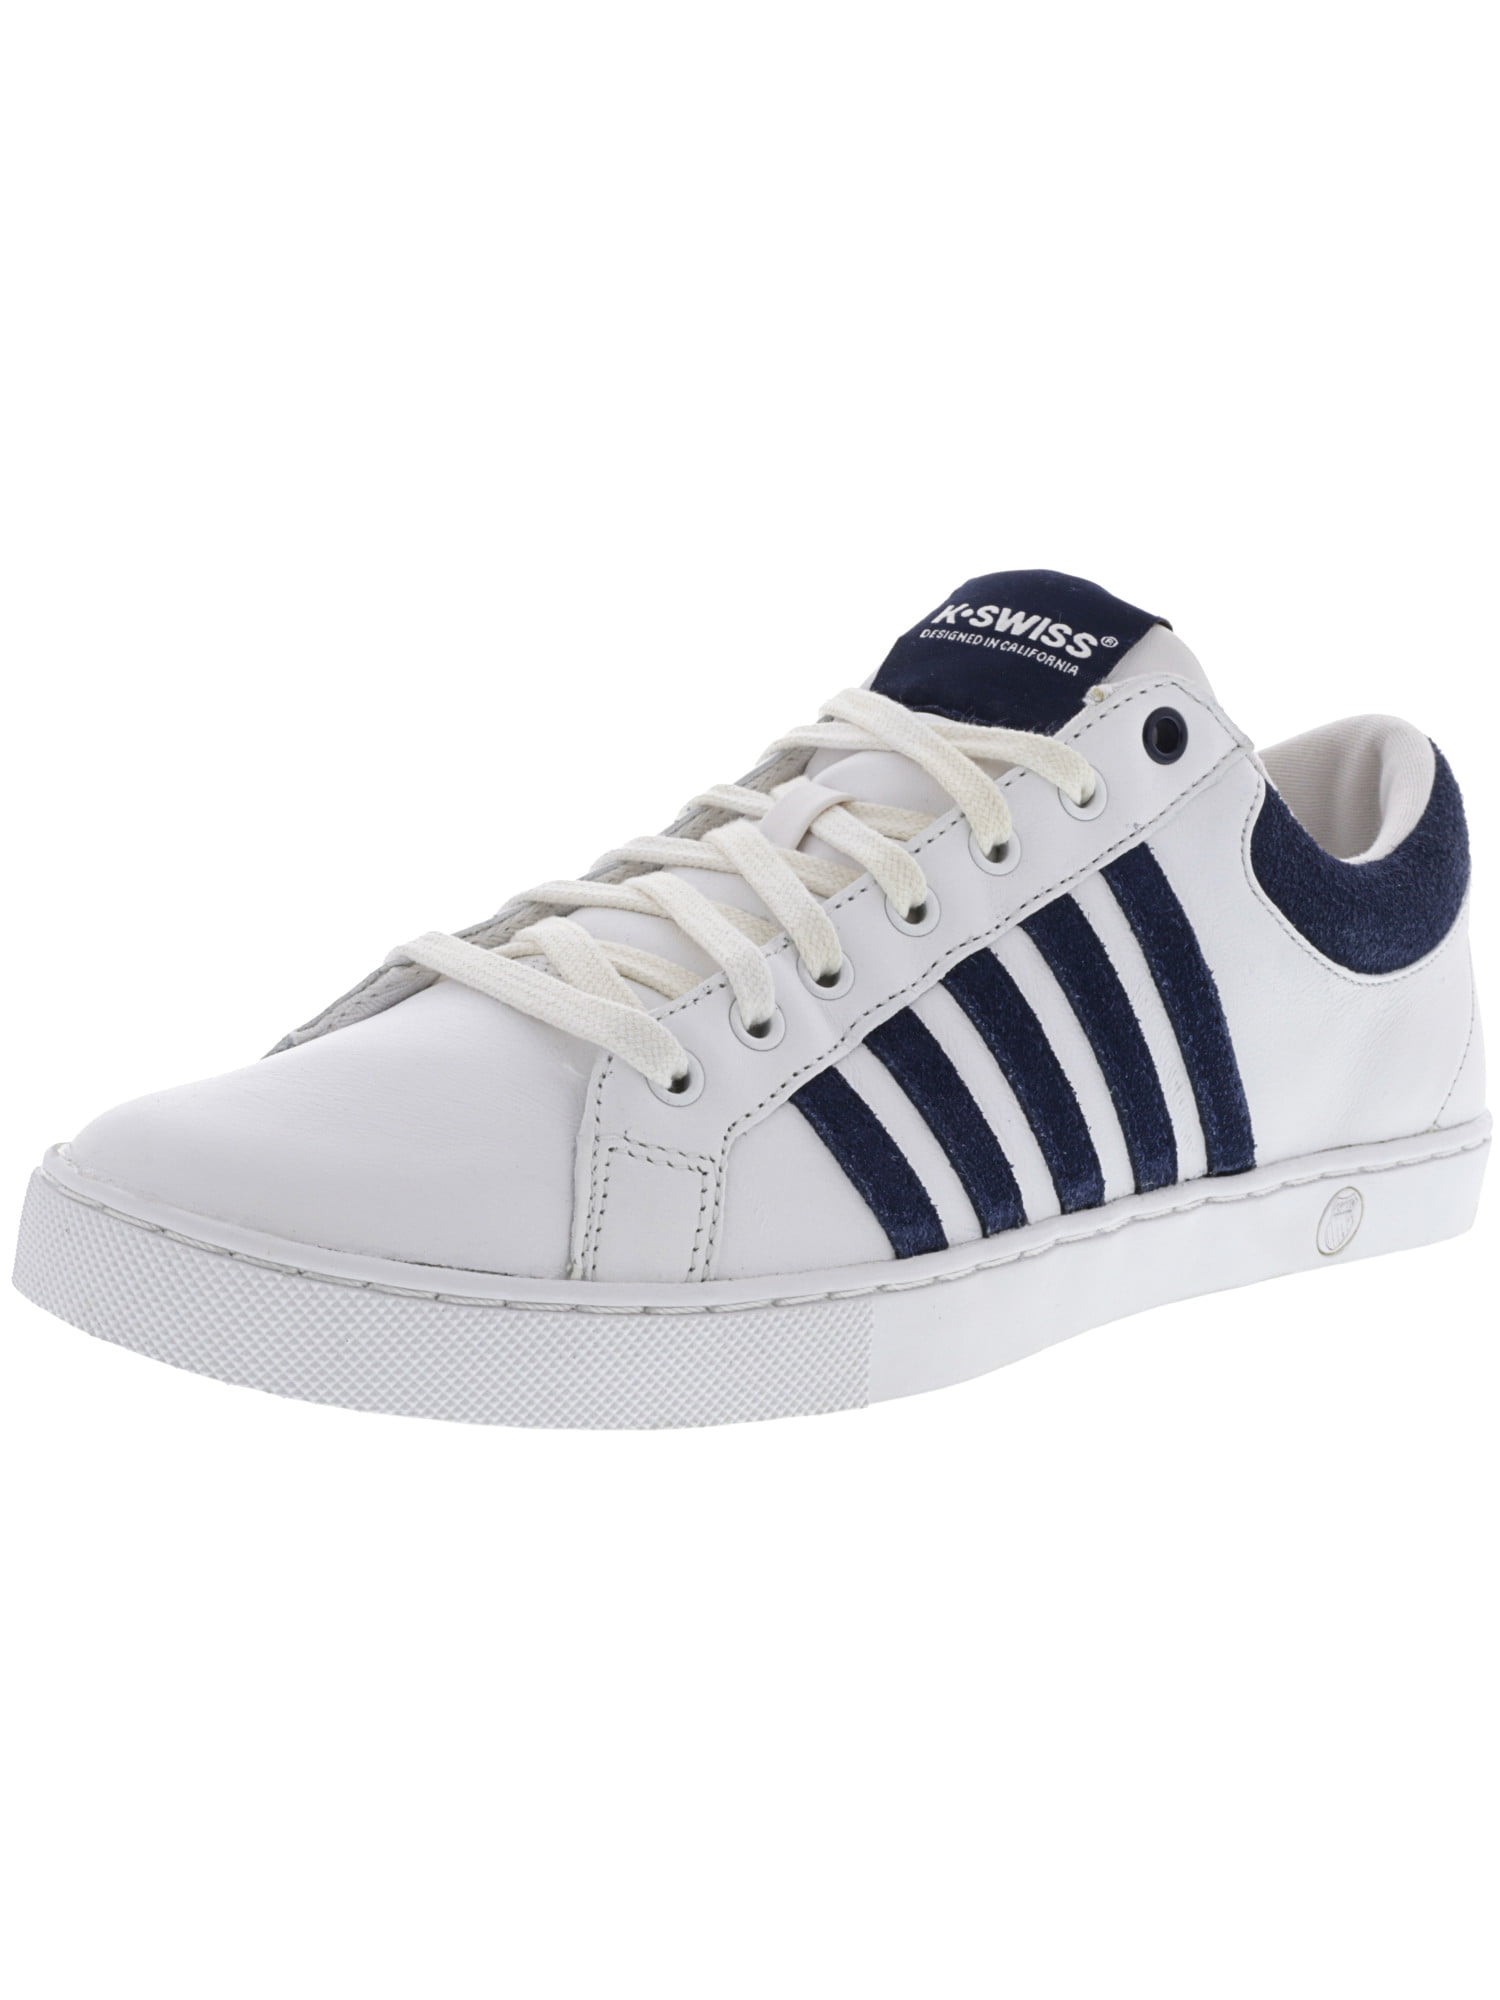 k swiss leather tennis shoes